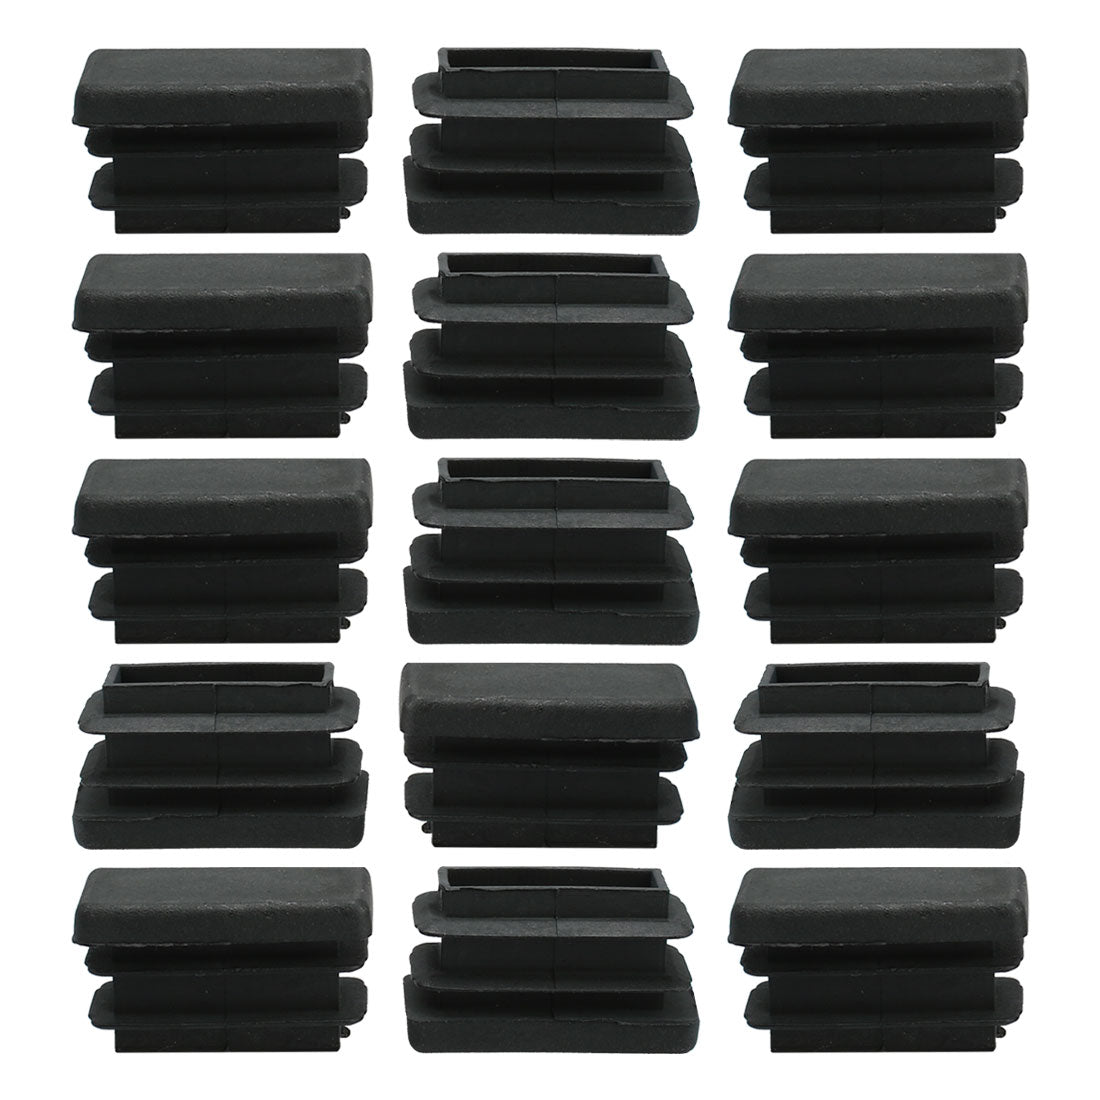 uxcell Uxcell Home Plastic Rectangle Furniture Chair Seats Foot Leg Tube Insert Cap Black 15pcs